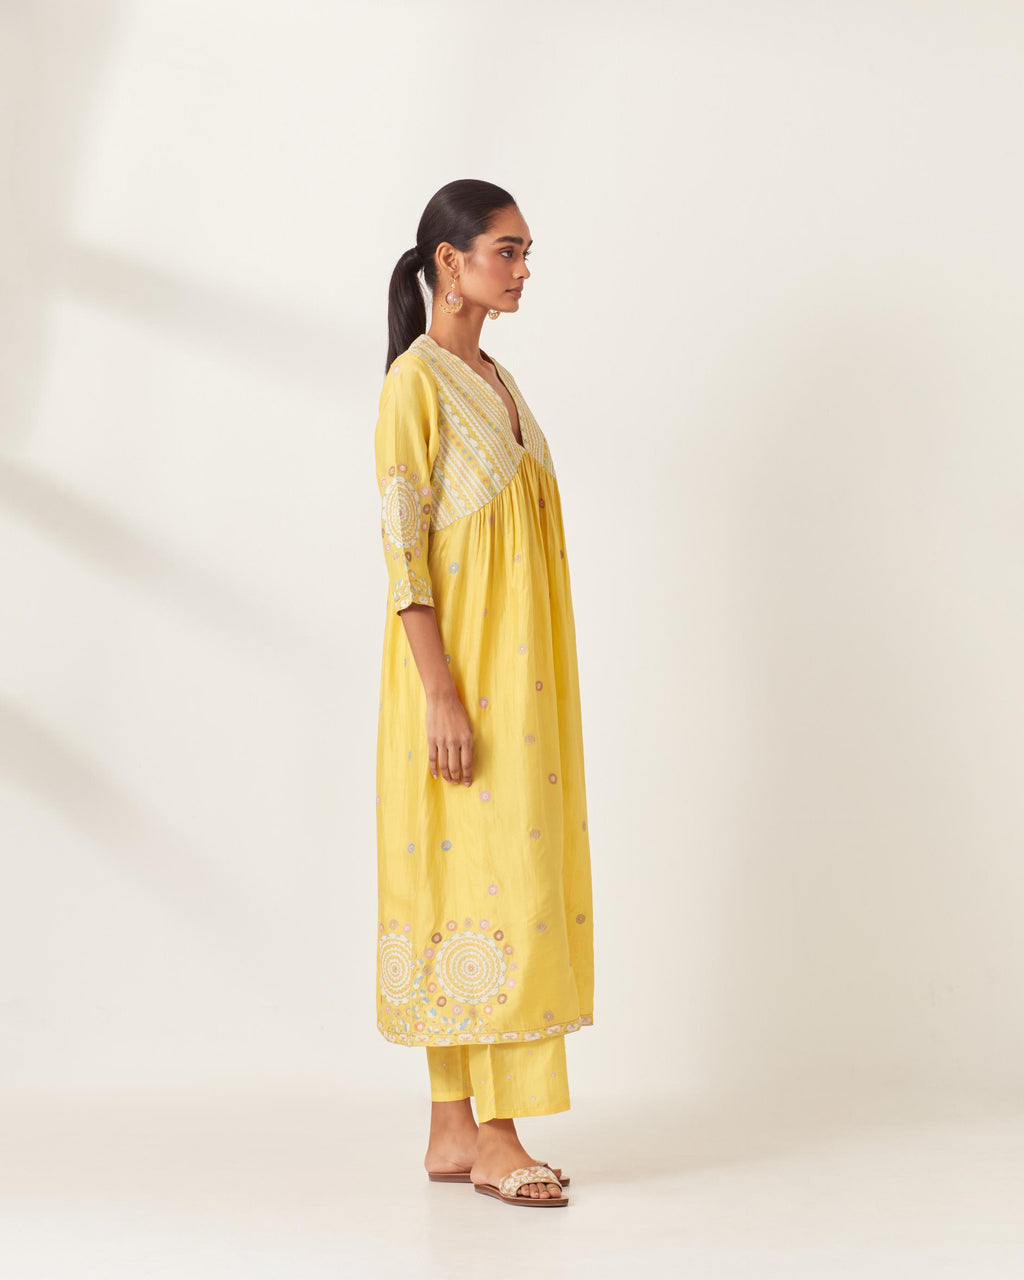 Yellow silk kurta dress set with appliqué stripes along with aari threadwork flowers and floral trellises along with a circular appliqued motif and fine gathers at empire line.